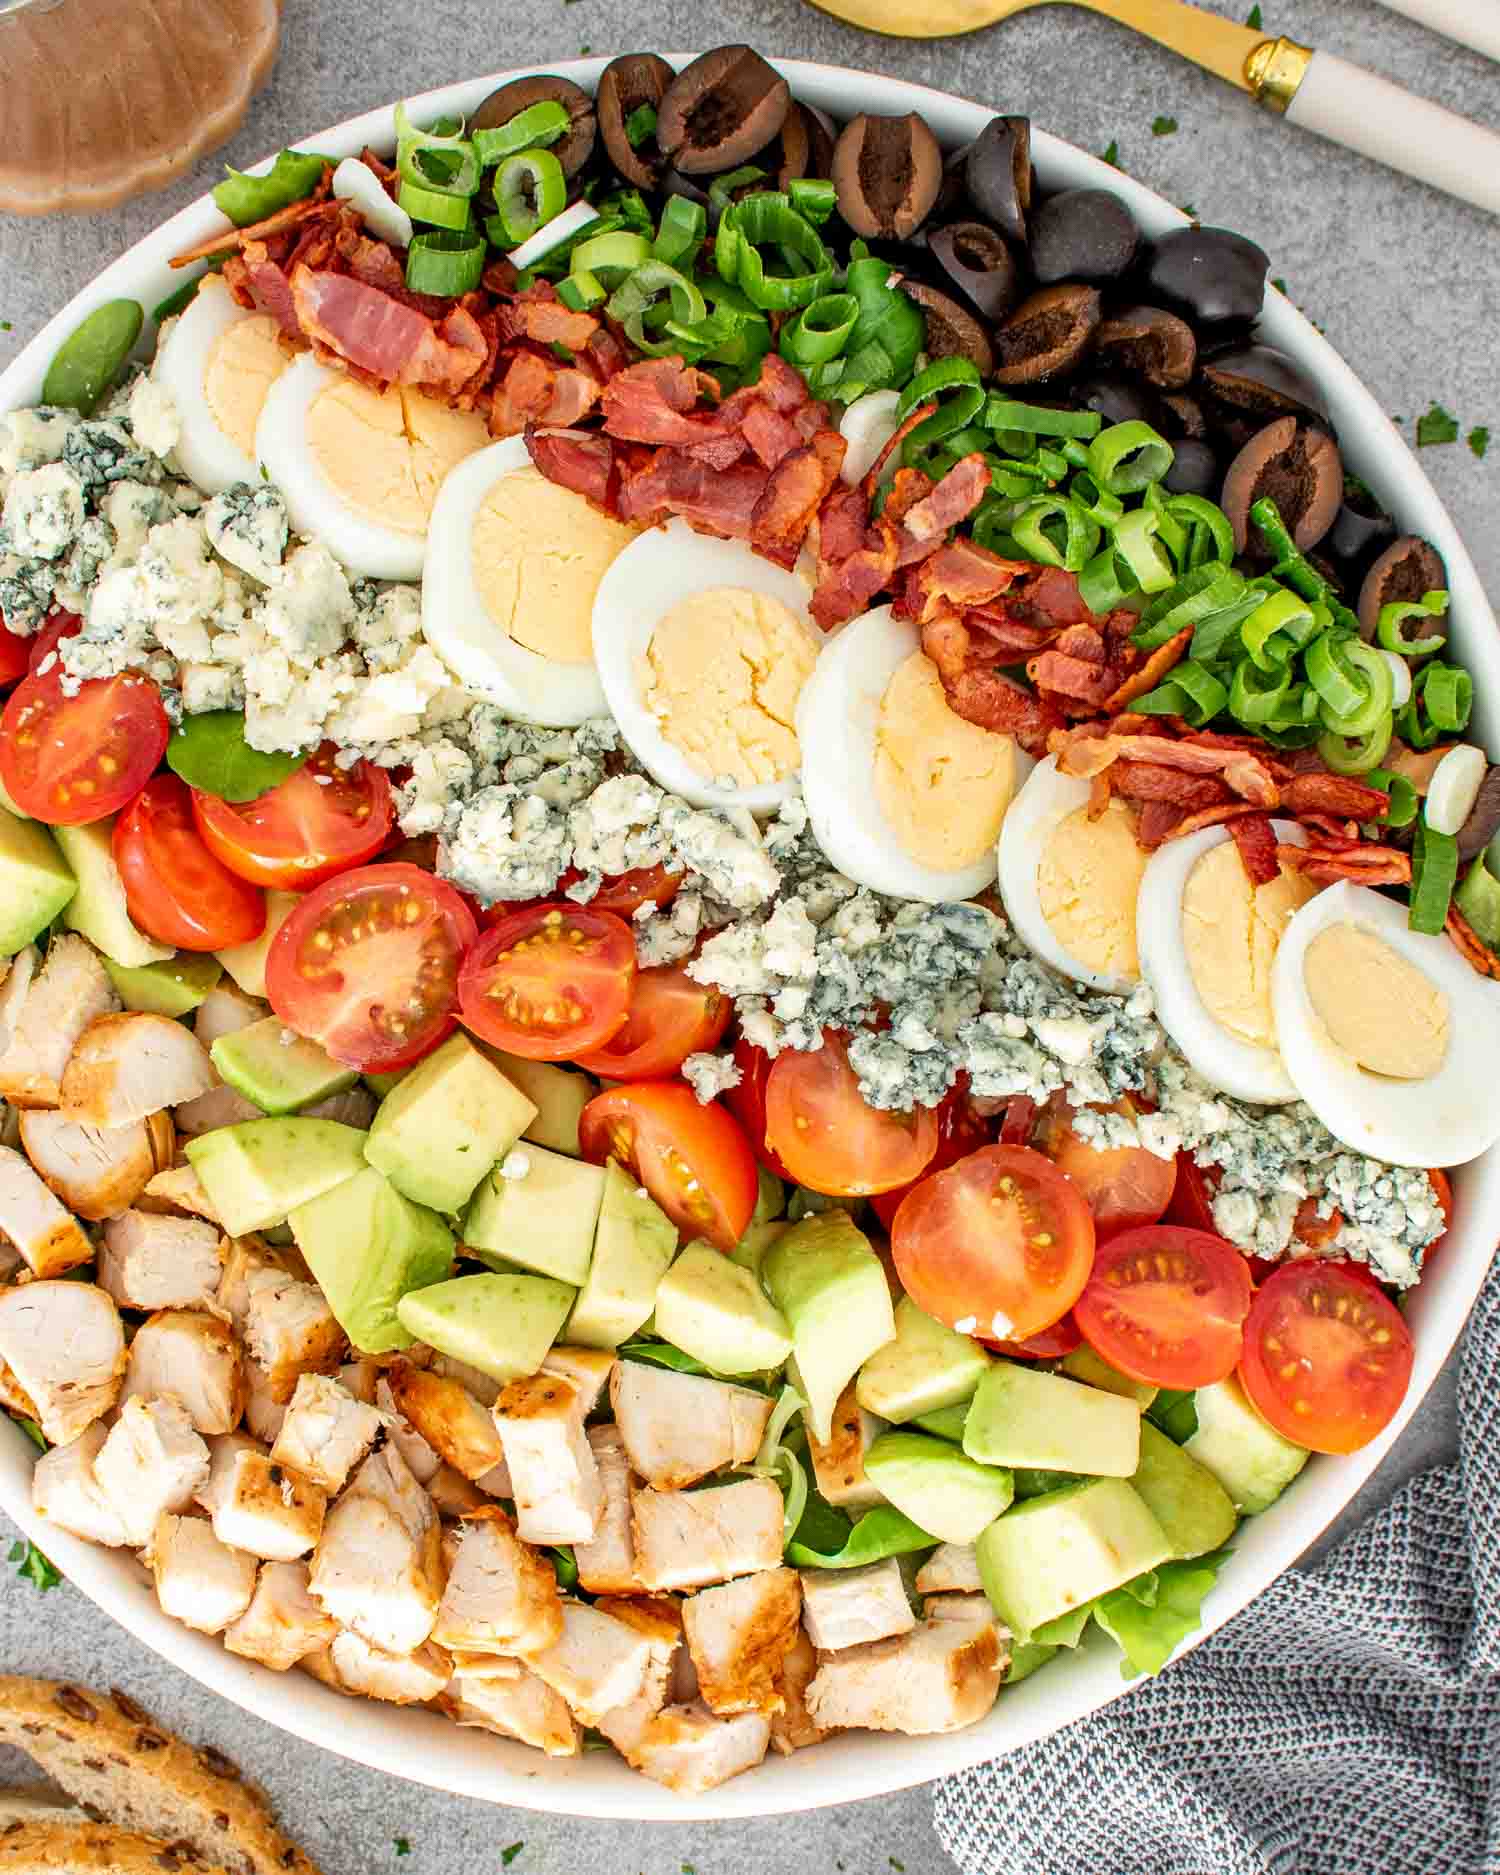 A fresh and colorful Cobb salad arranged beautifully in a bowl.